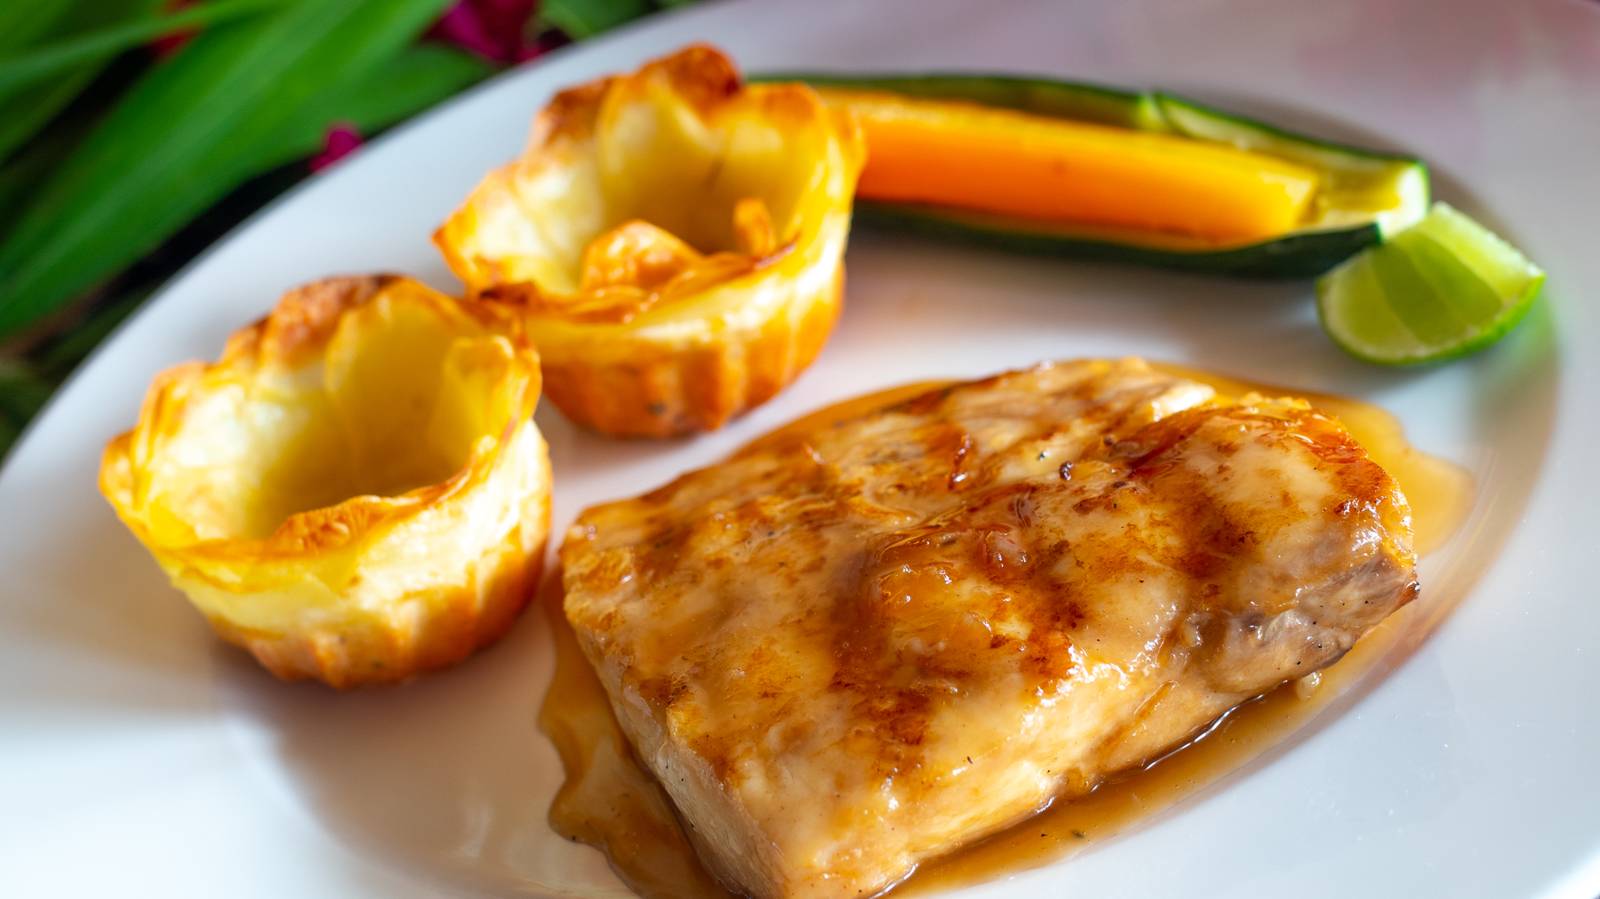 Ginger and Honey Pan-Fried Fish Fillet with Potato Roses